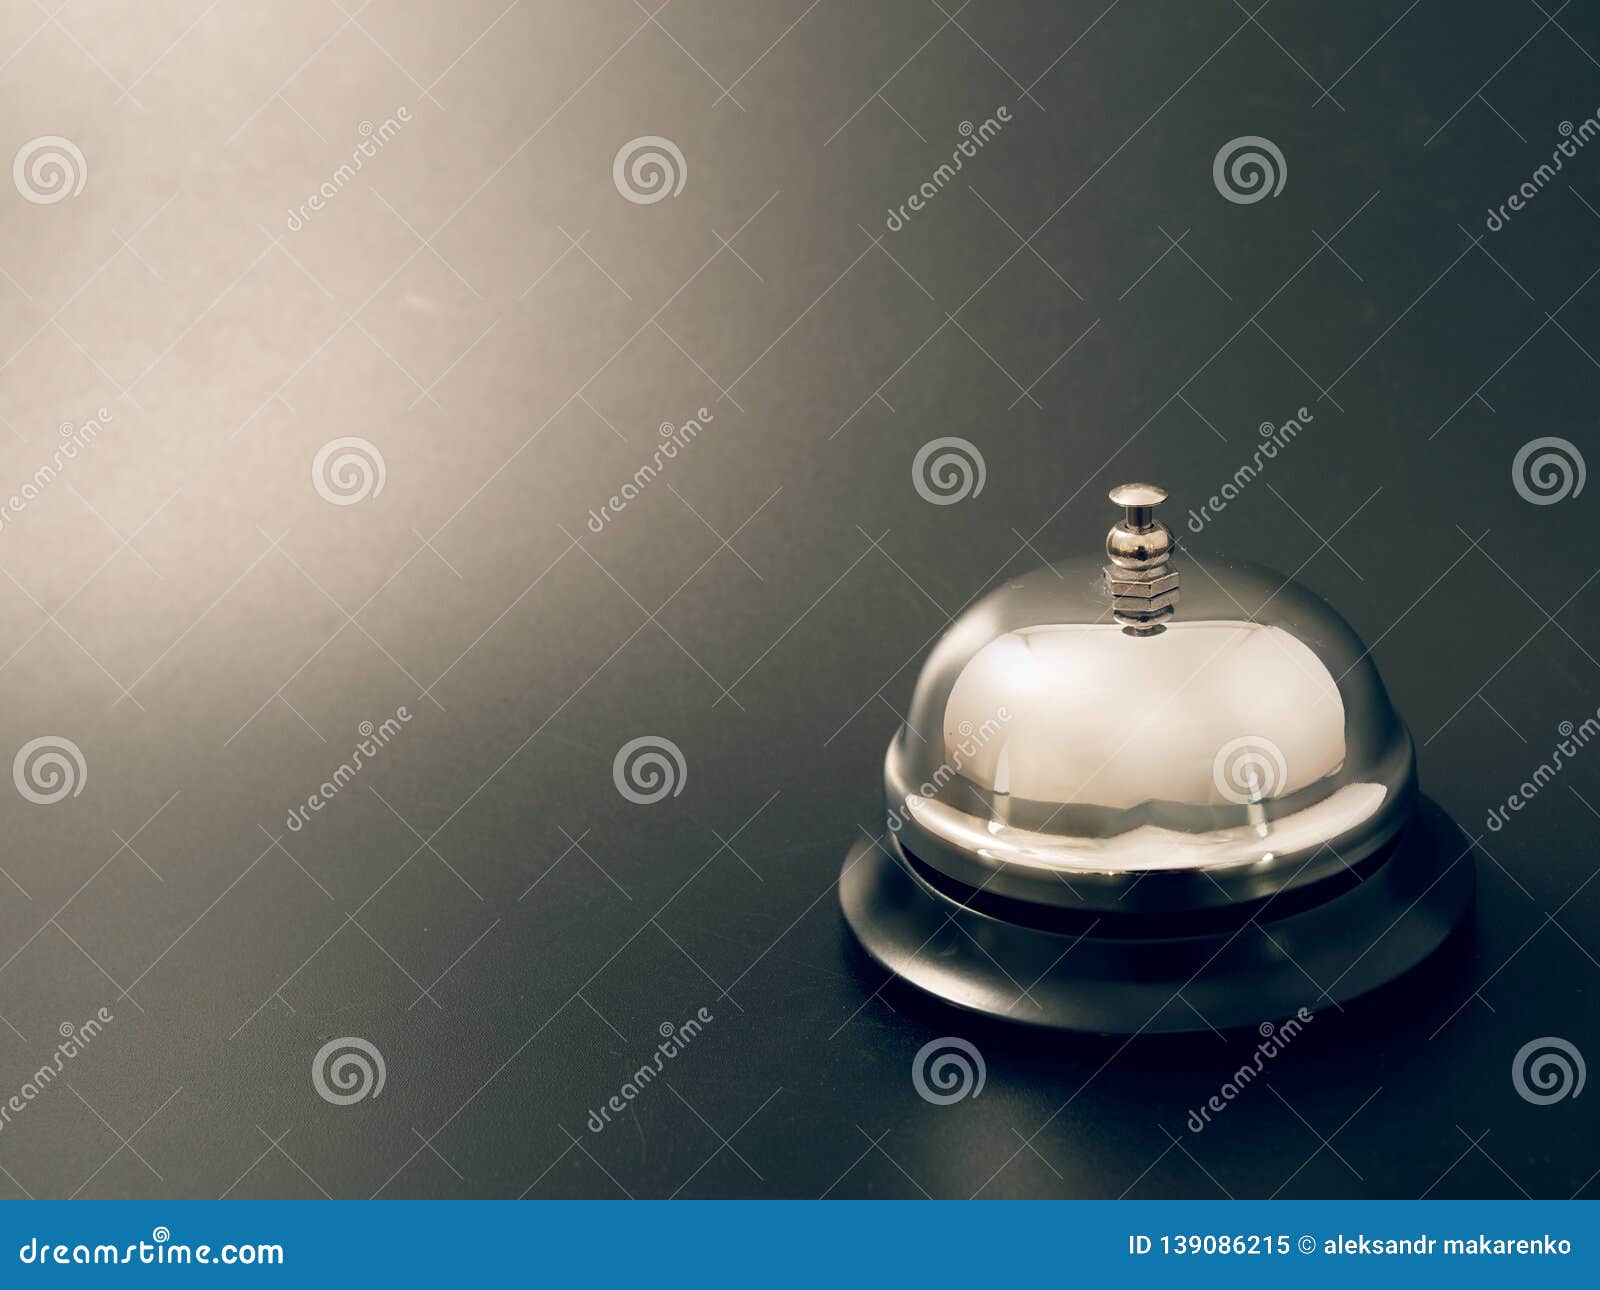 Bell At The Reception Desk Made Of Metal On A Black Background